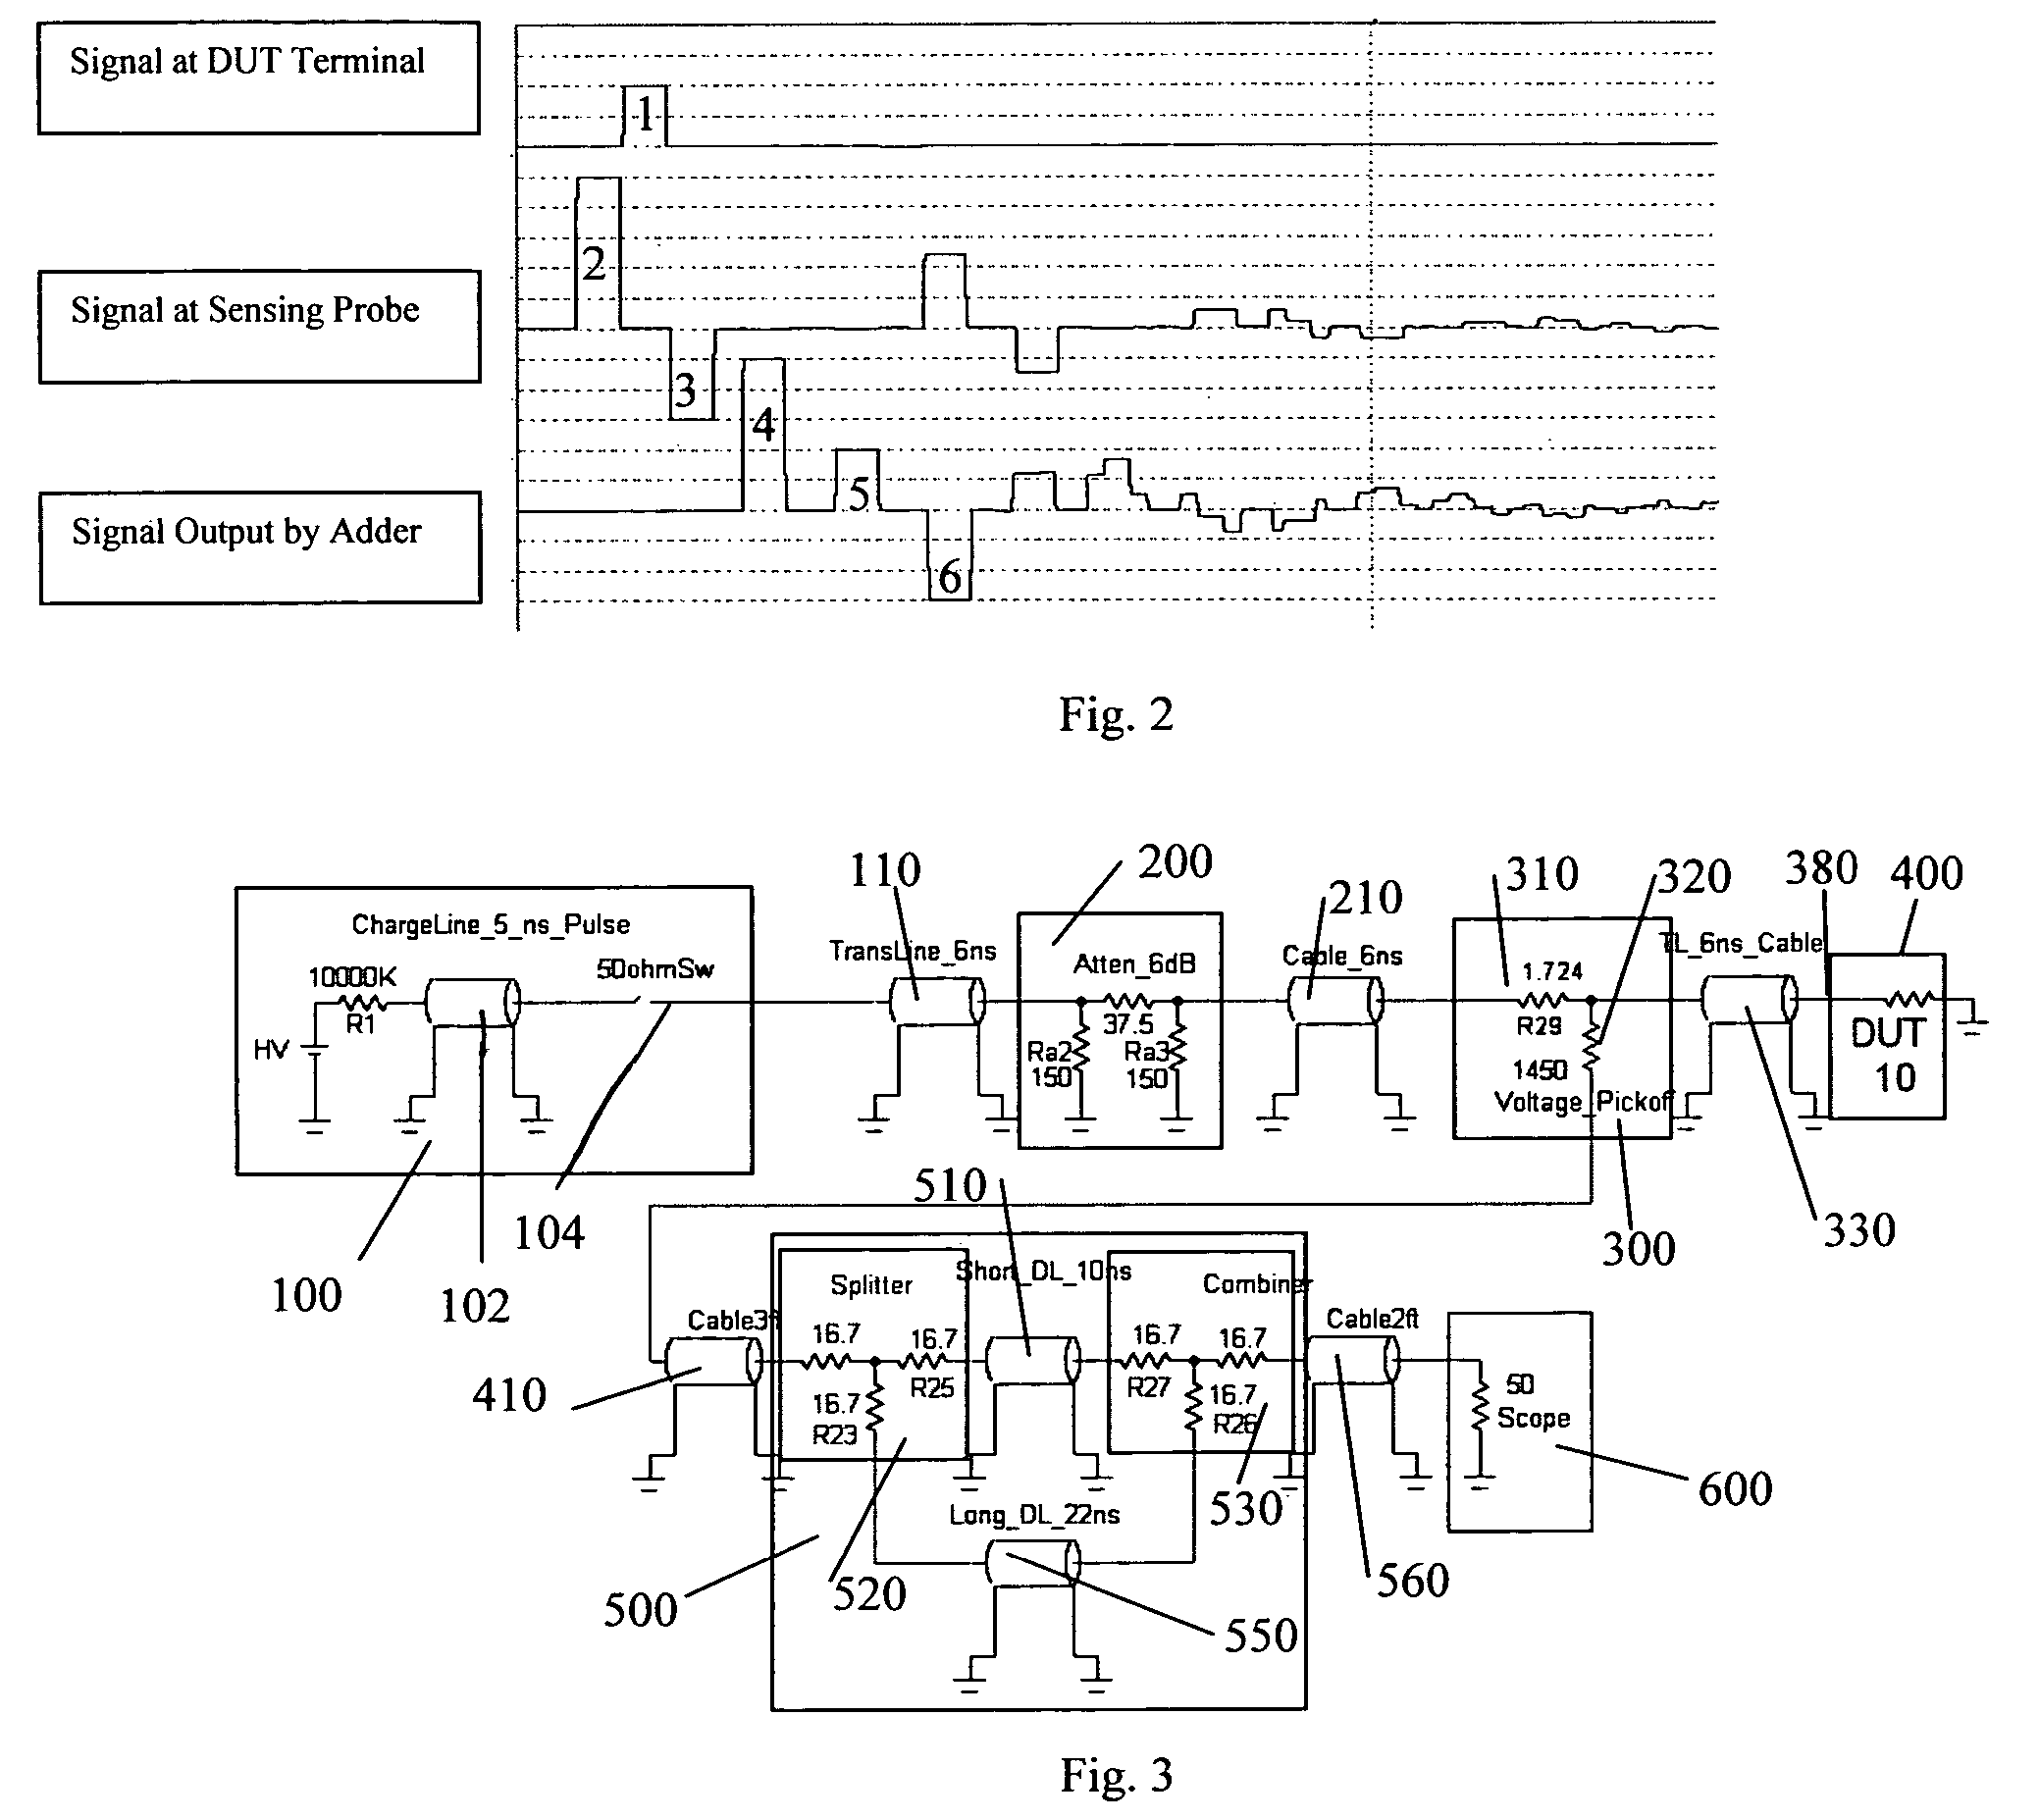 Transmission line pulse measurement system for measuring the response of a device under test